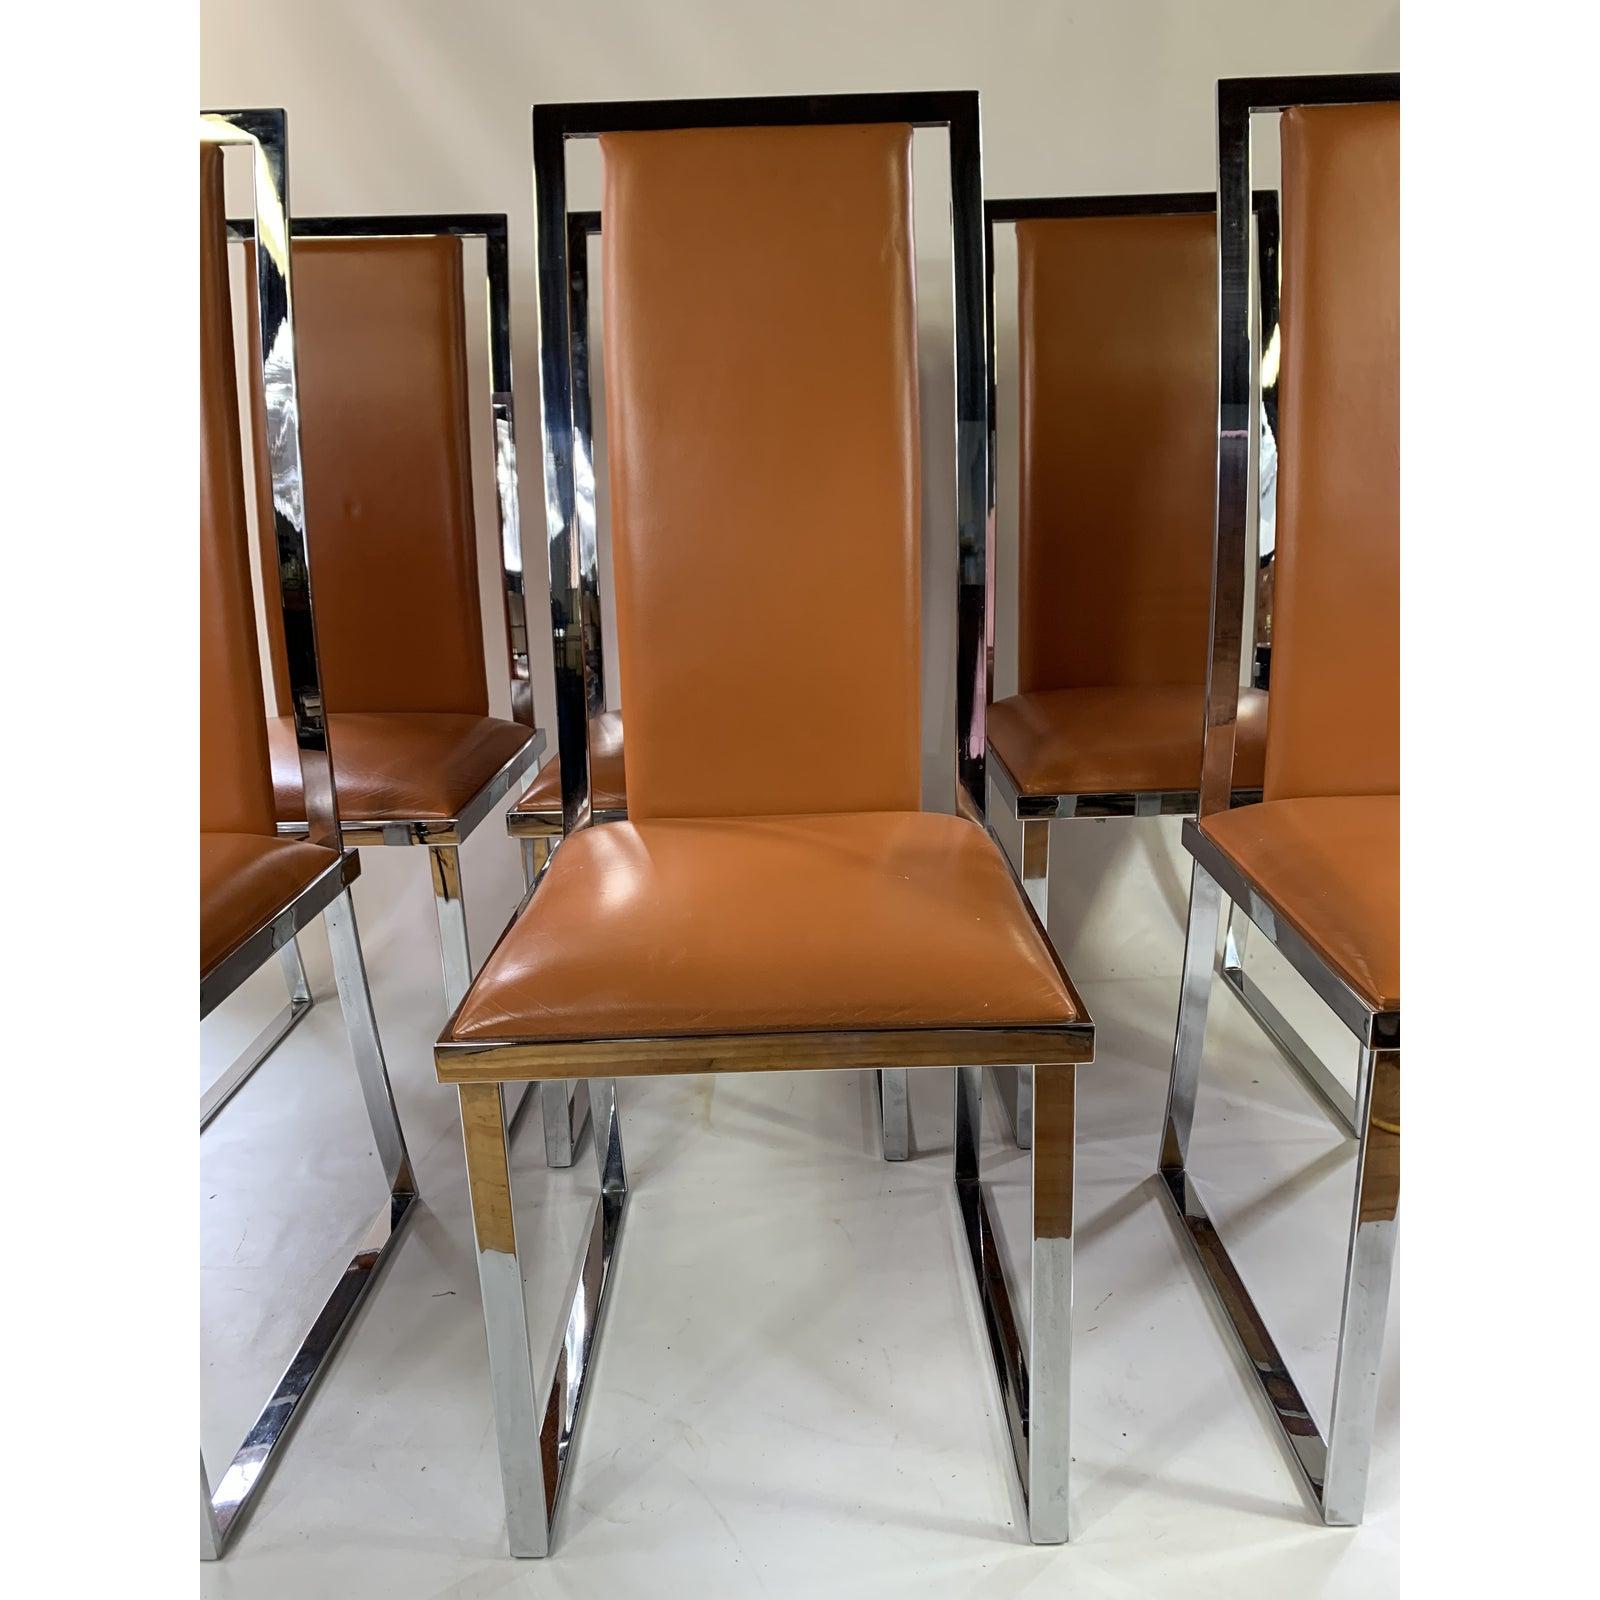 Very nice set of very well made 1970s chrome and leather chairs in the style of Milo baughman.